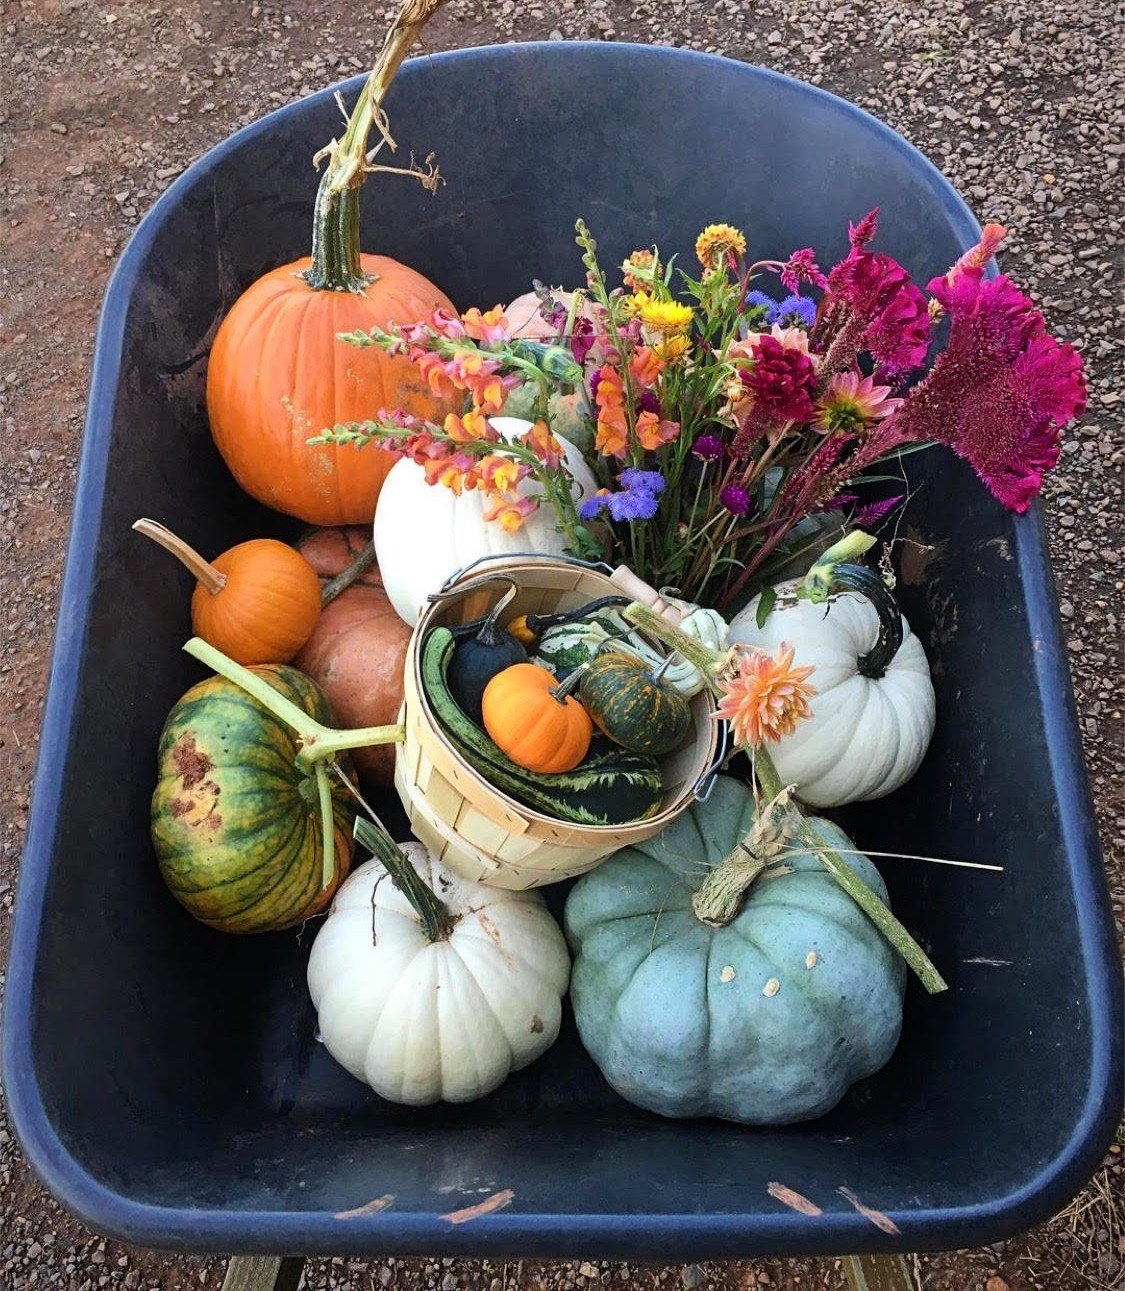  Liberty Mills Farm will hold its Fall Festival Sept. 30 to Oct. 1, with a corn maze, pumpkin patch, vendors and more. (Photo Credit: Courtesy of Liberty Mills Farm) 